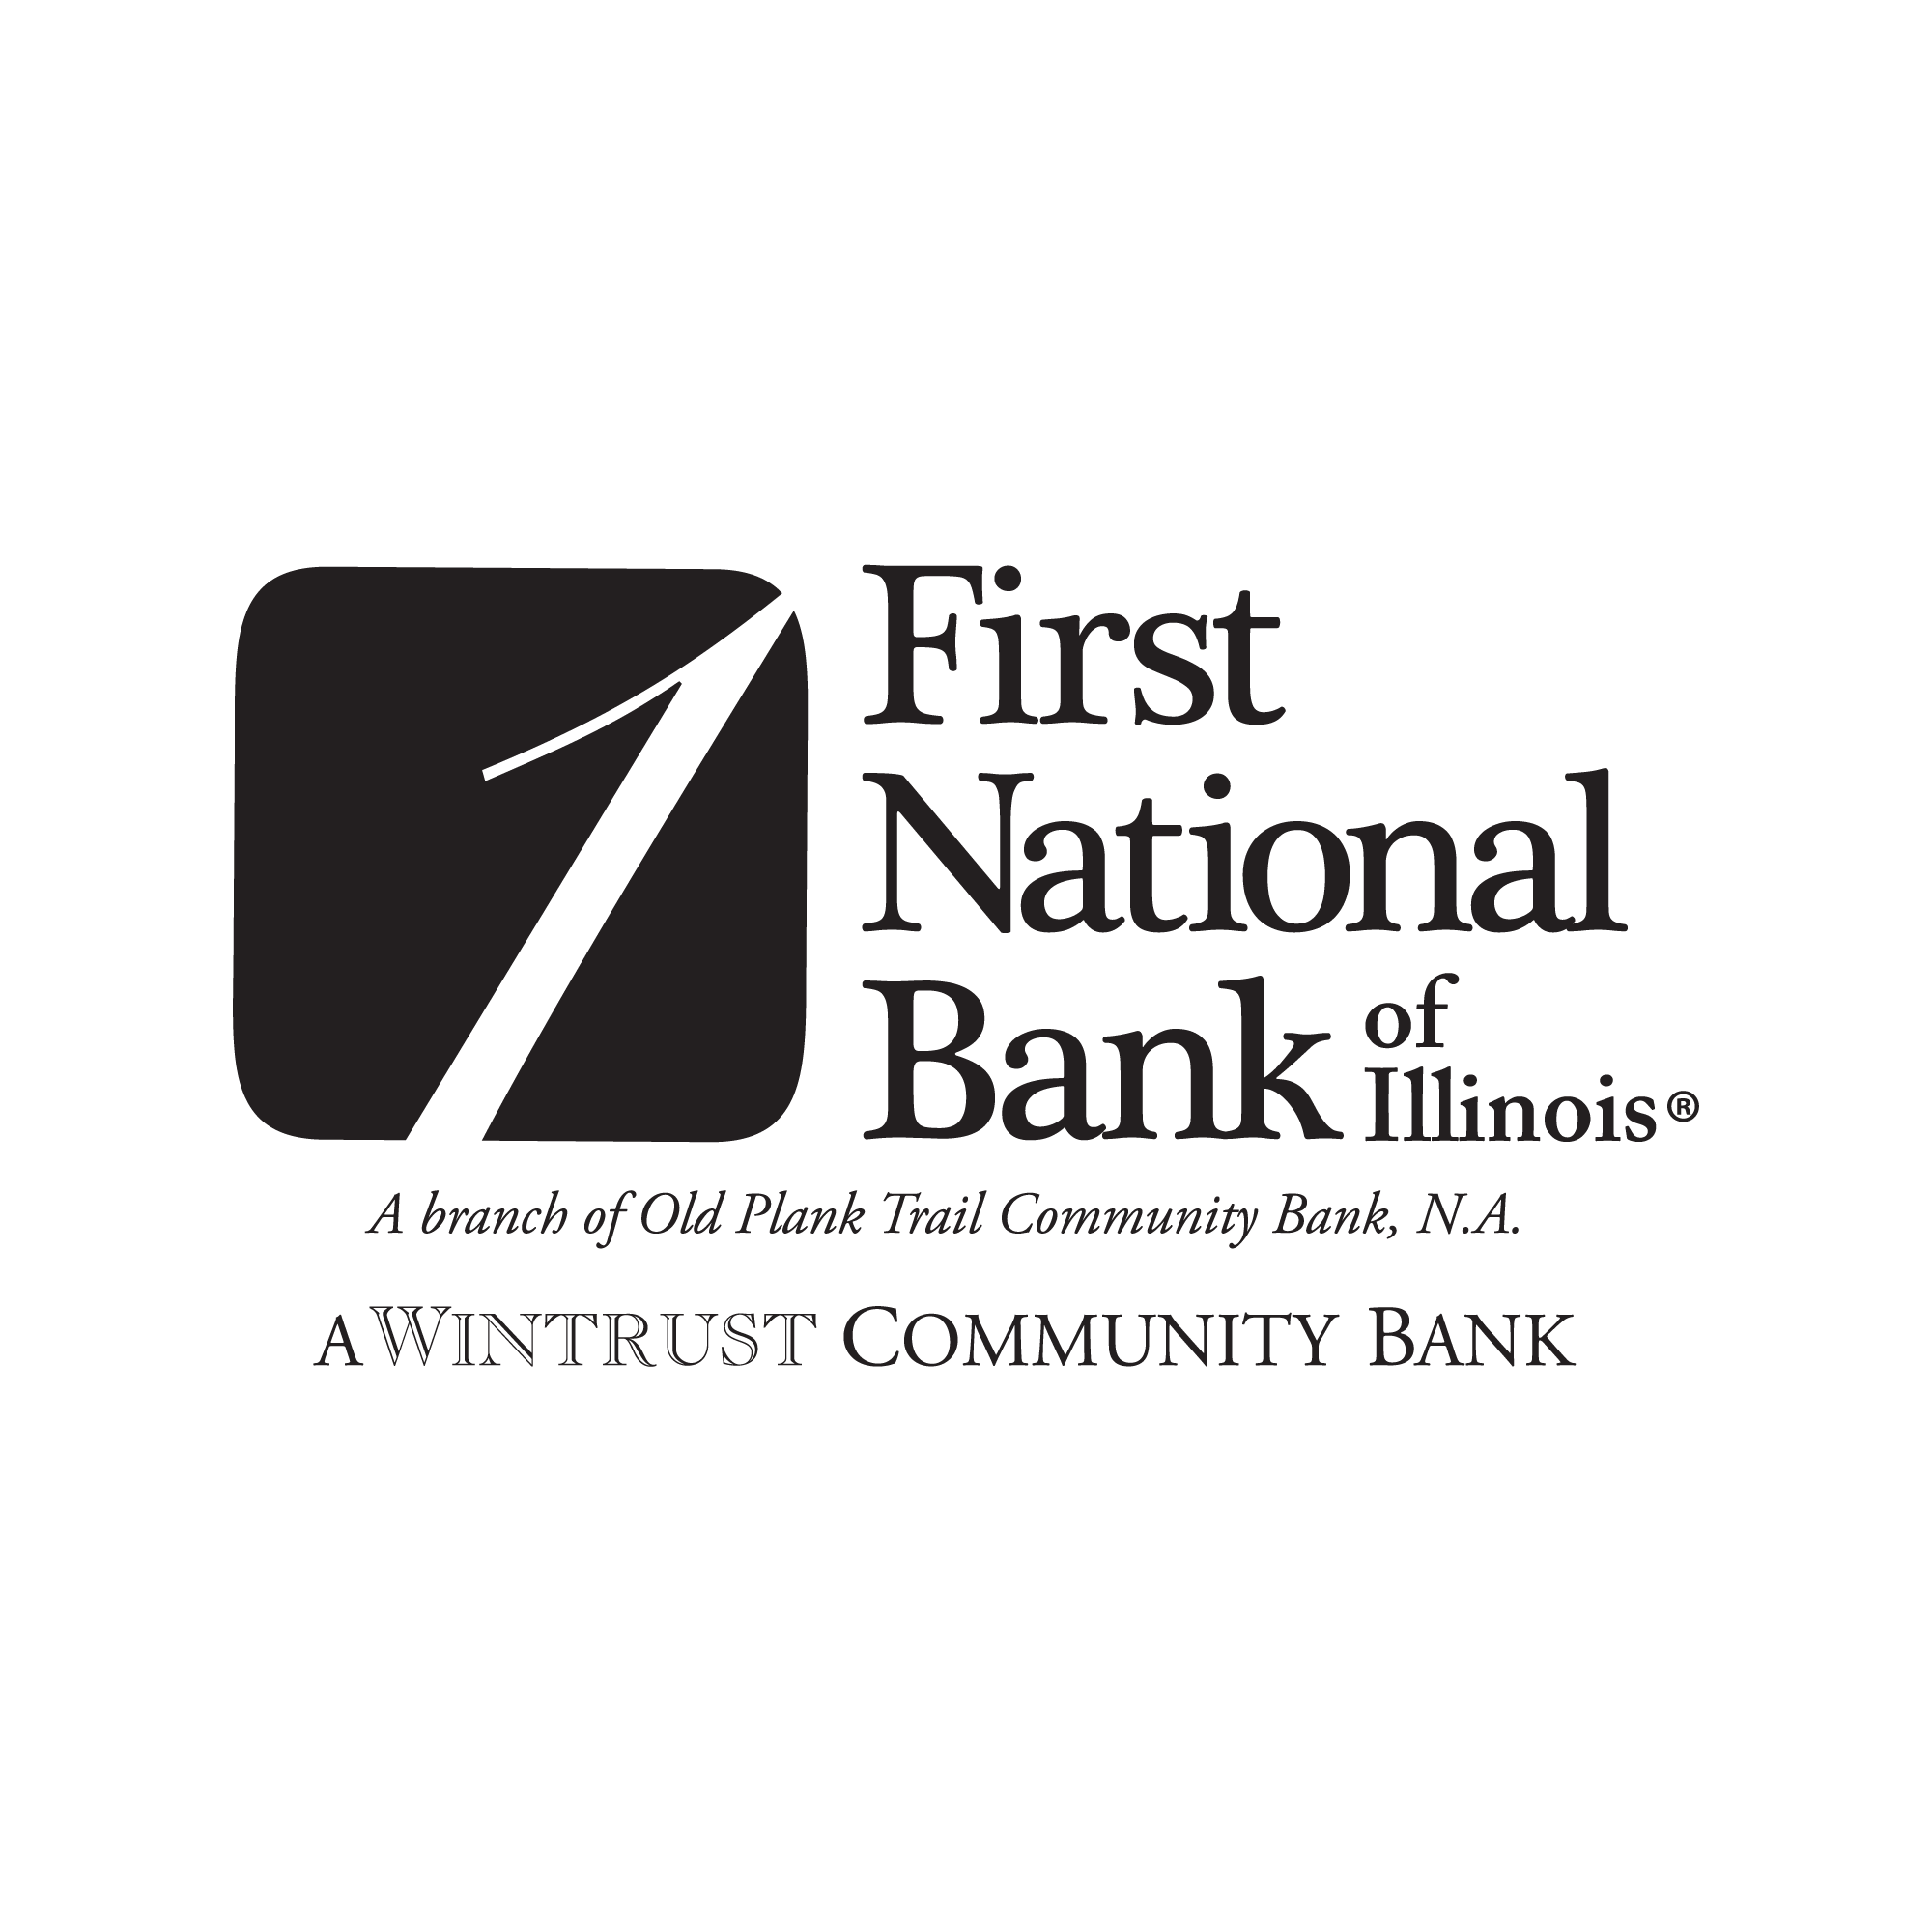 First National Bank of Illinois